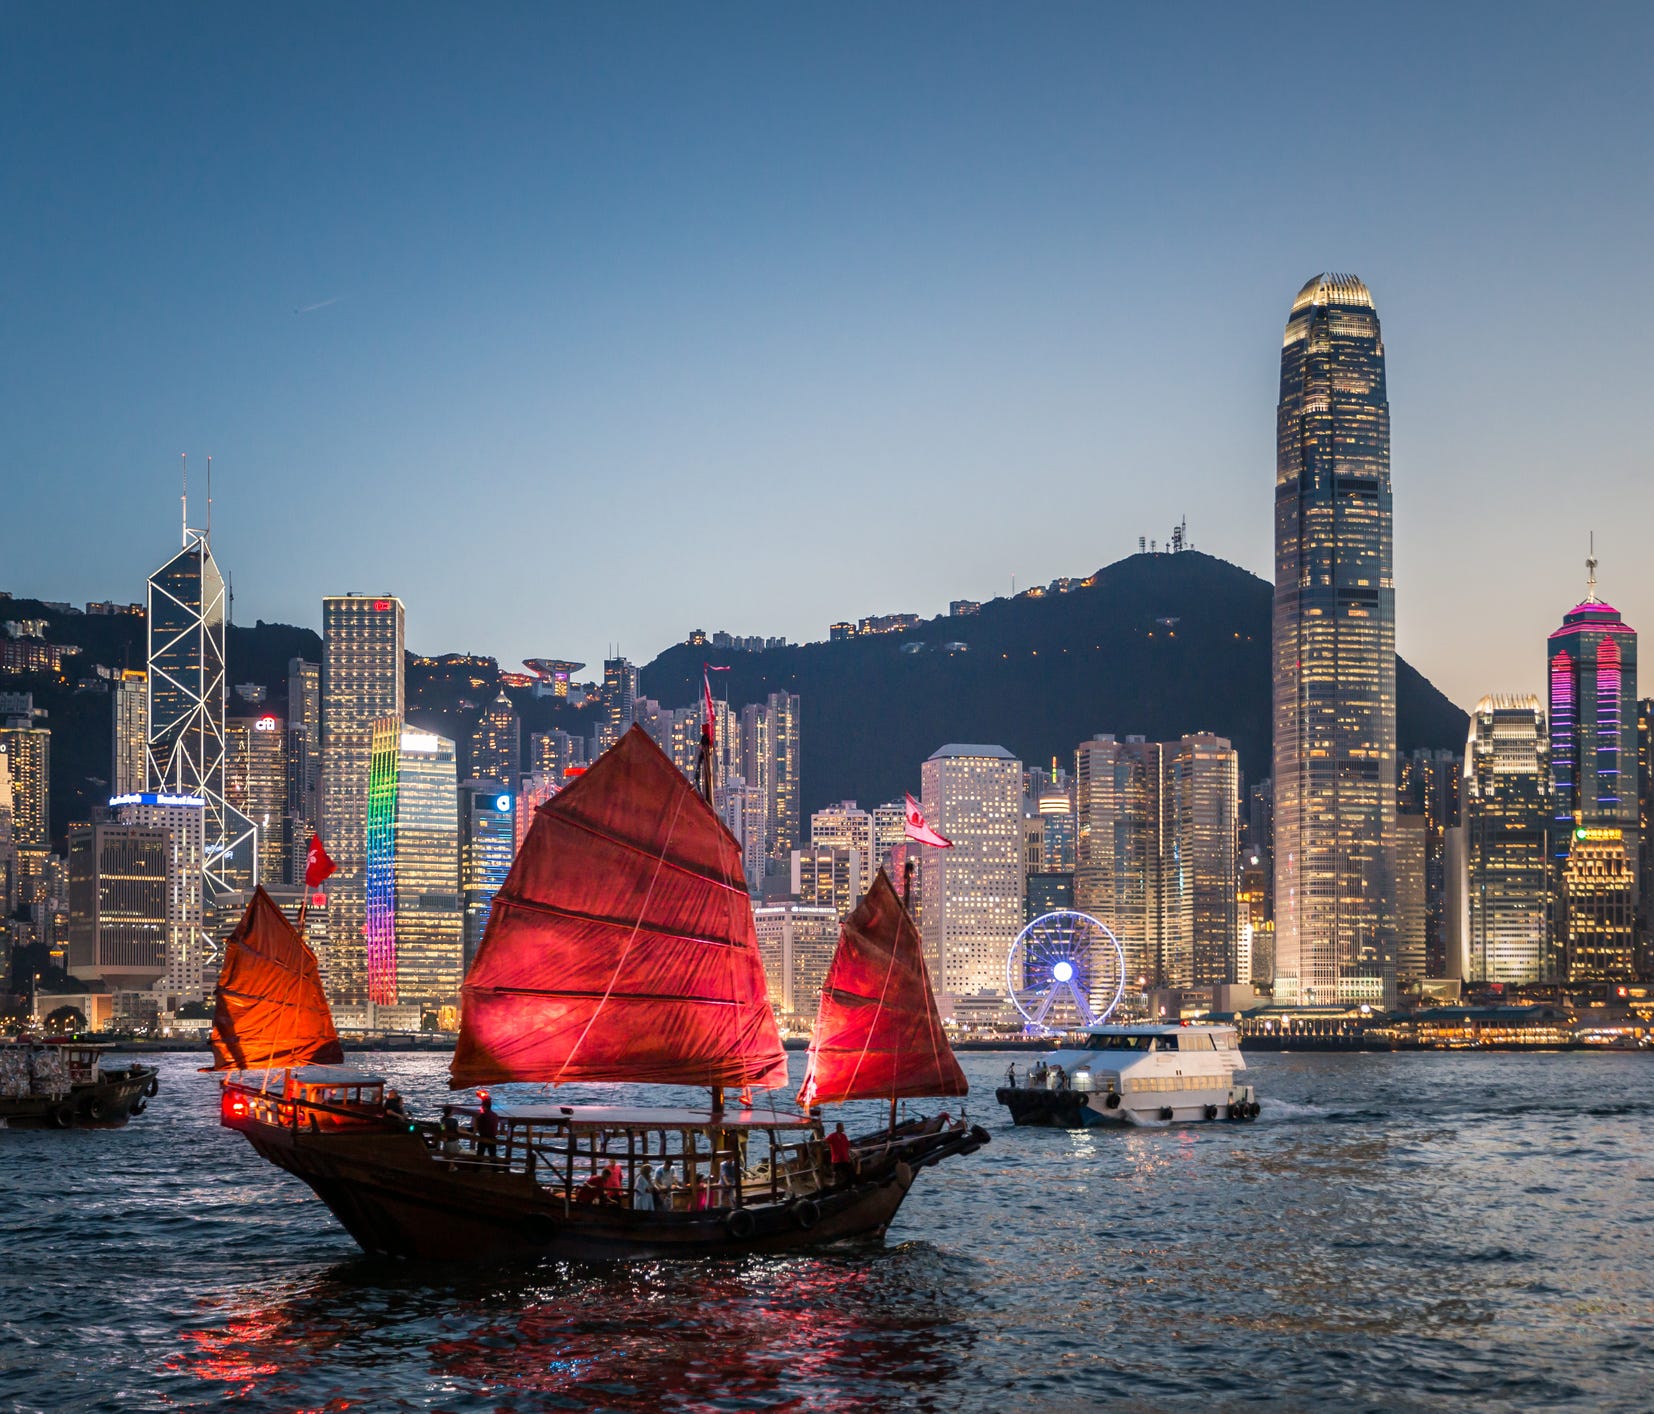 Hong Kong: Dreaming of sailboats in Victoria Harbor, but budgeting for an affordable vacation? West Coasters might be able to get there for less than they'd spend flying across the U.S. — Hong Kong Airlines launched flights between L.A. and Hong Kong